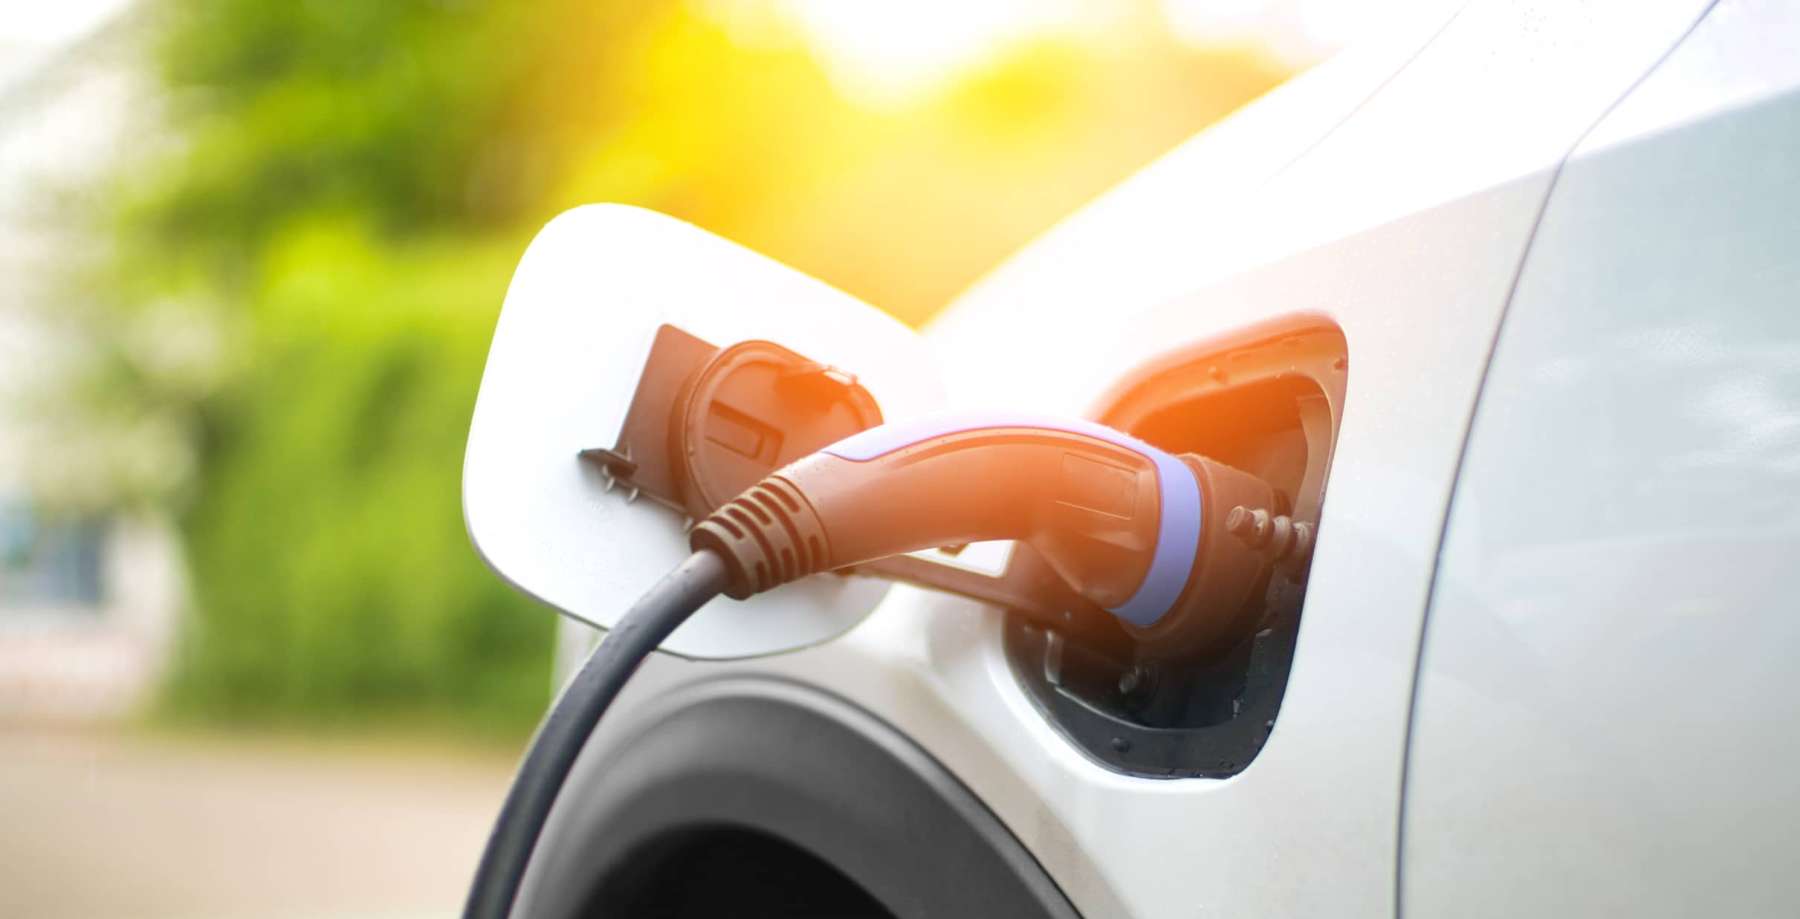 Rhode Island News: From RI to OH in an EV – Debunking the Myths of Electric Vehicles